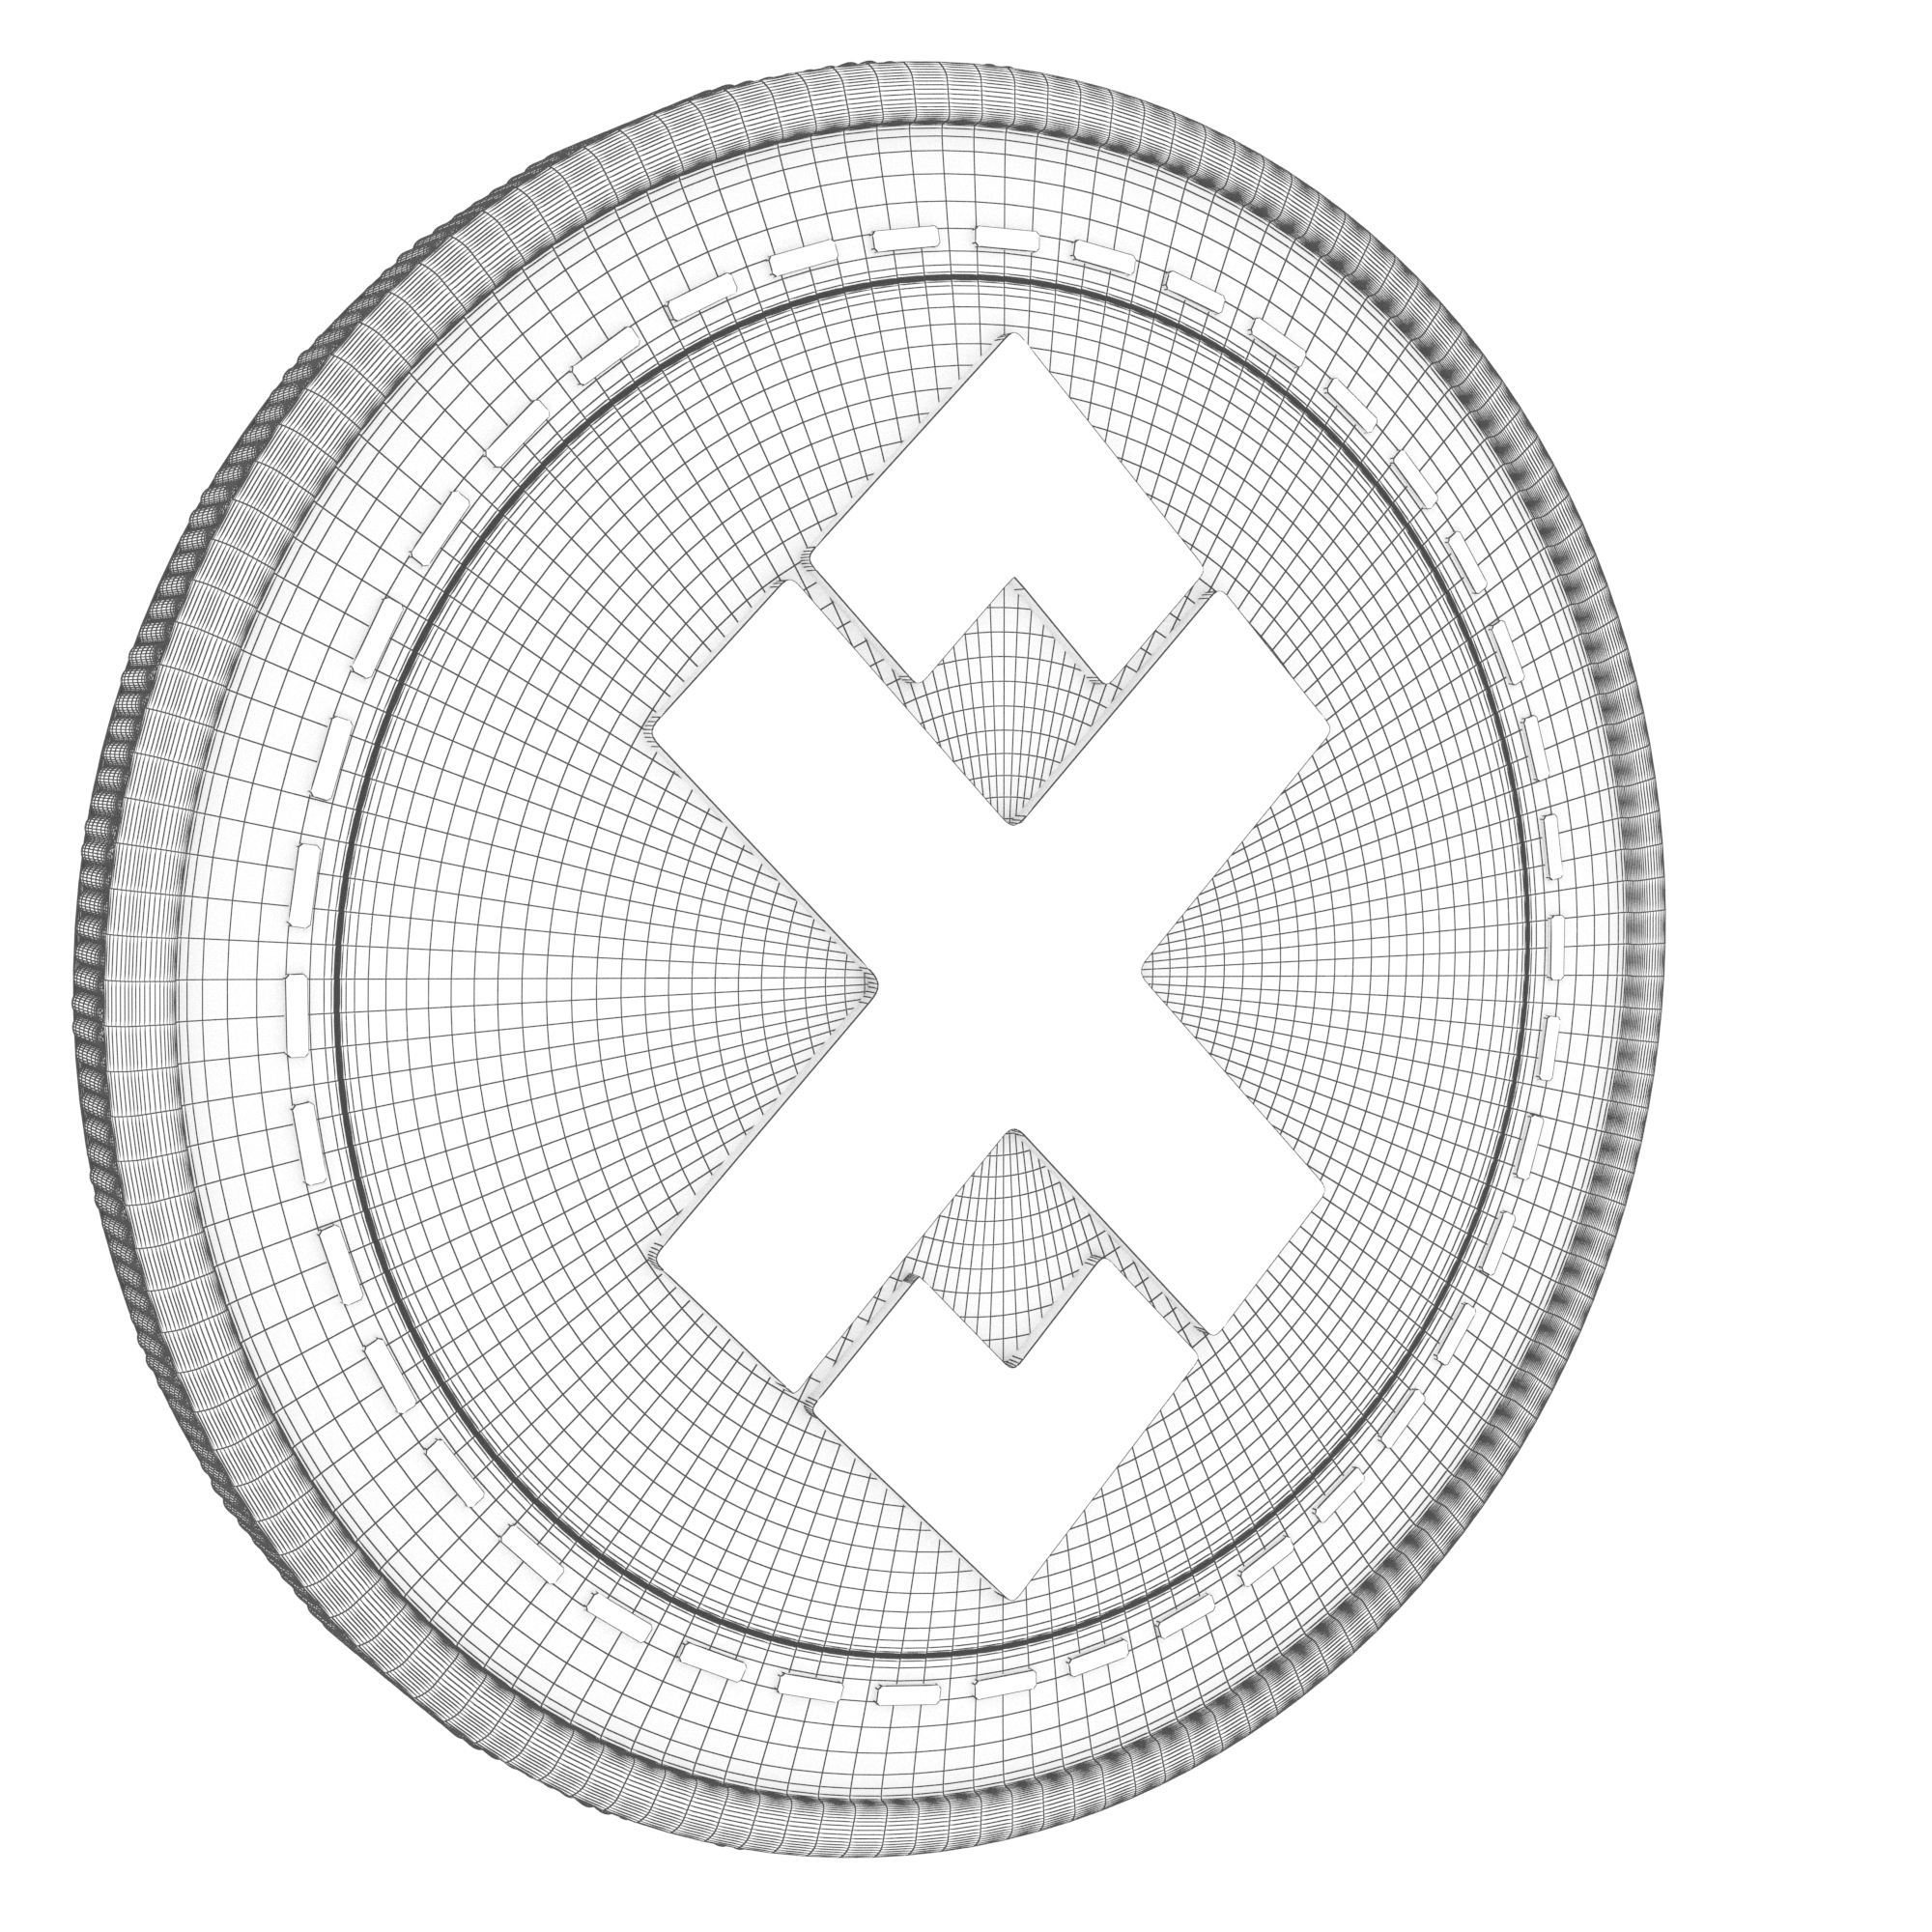 adx coins